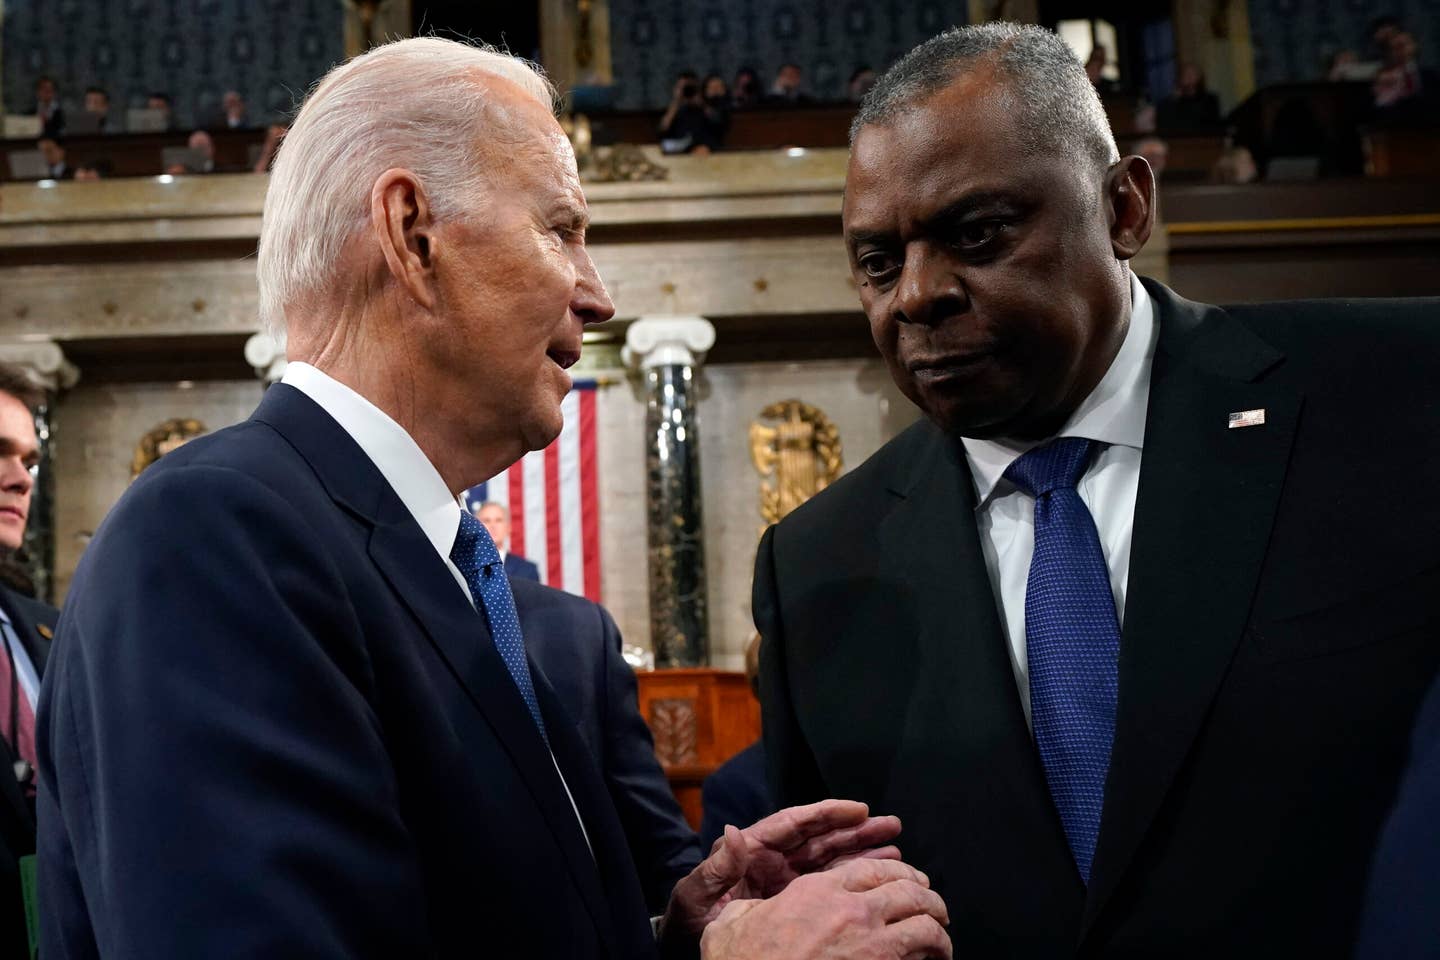 U.S. President Joe Biden (left) was not notified that Defense Secretary Lloyd Austin was hospitalized for four days. (Photo by Jacquelyn Martin-Pool/Getty Images)